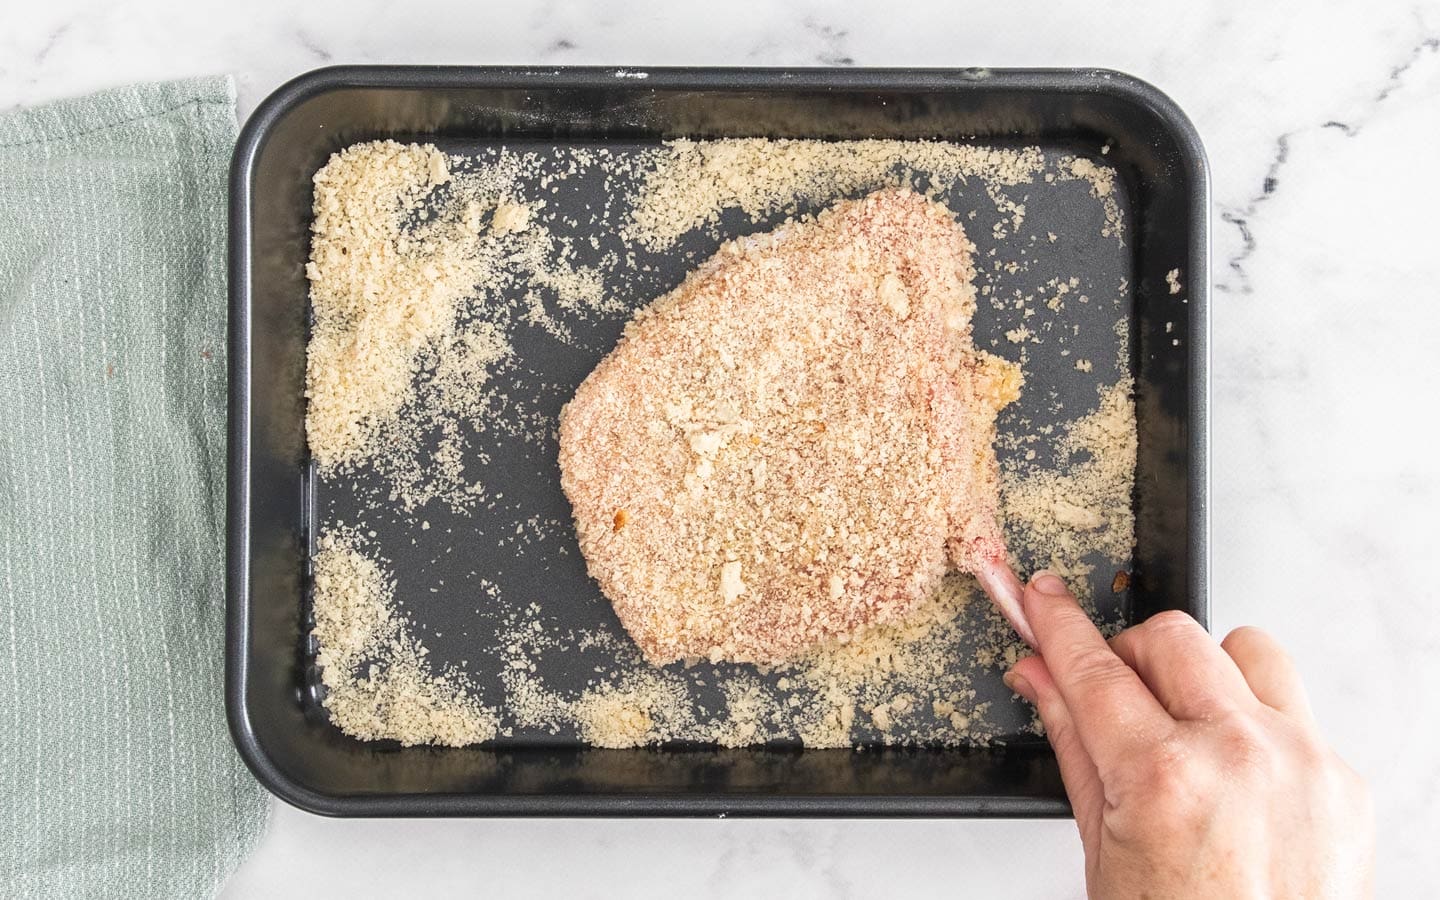 A pork cutlet being coated in bread crumbs.